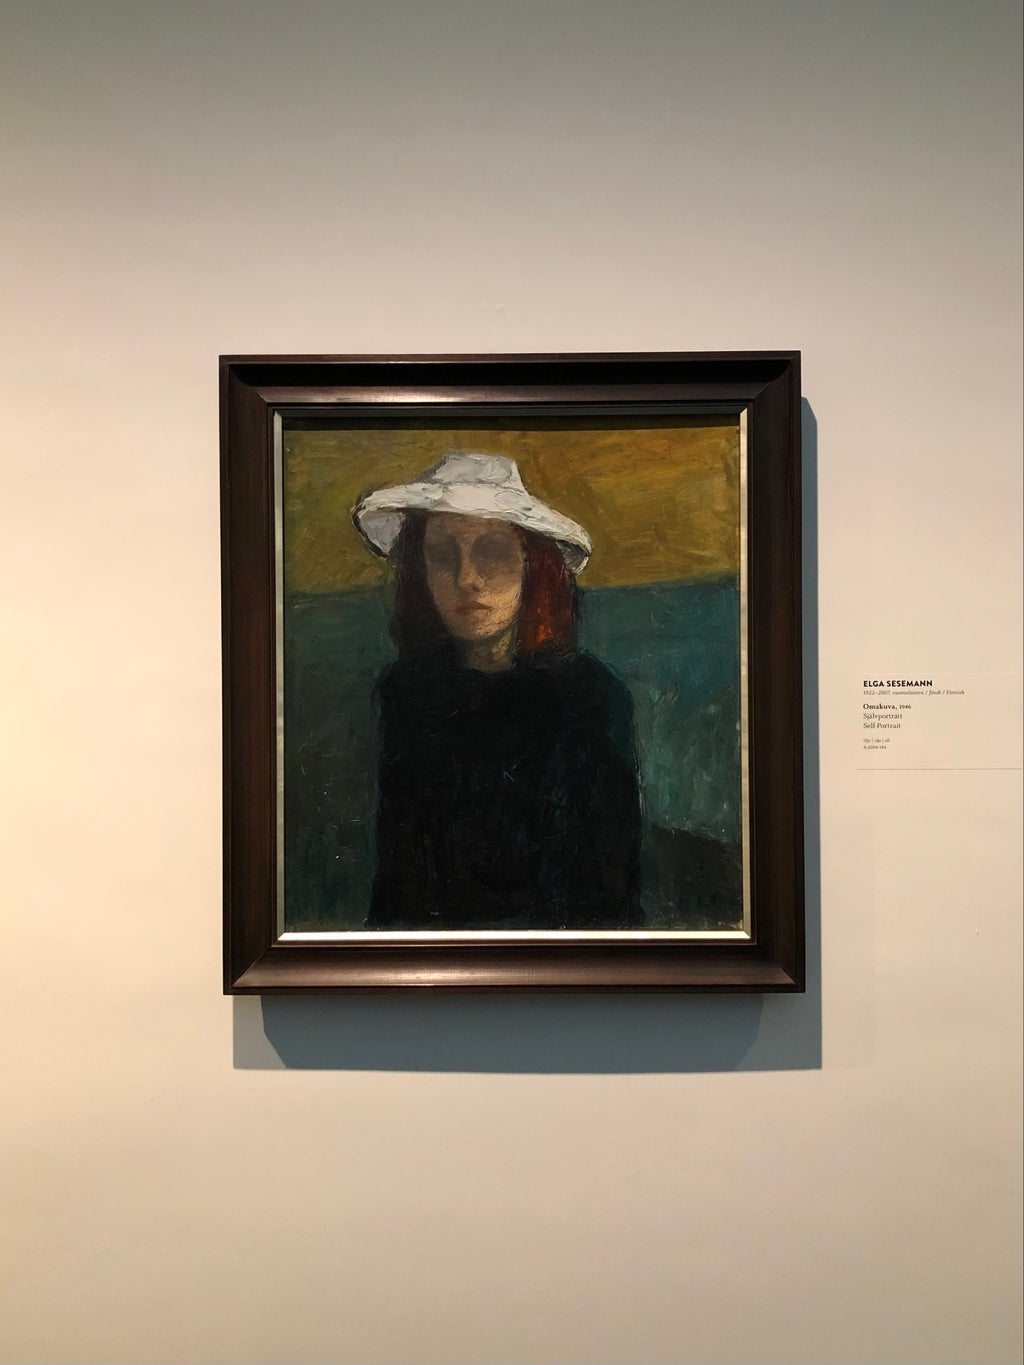 A portrait painting of the artist herself. A young woman with white hat.